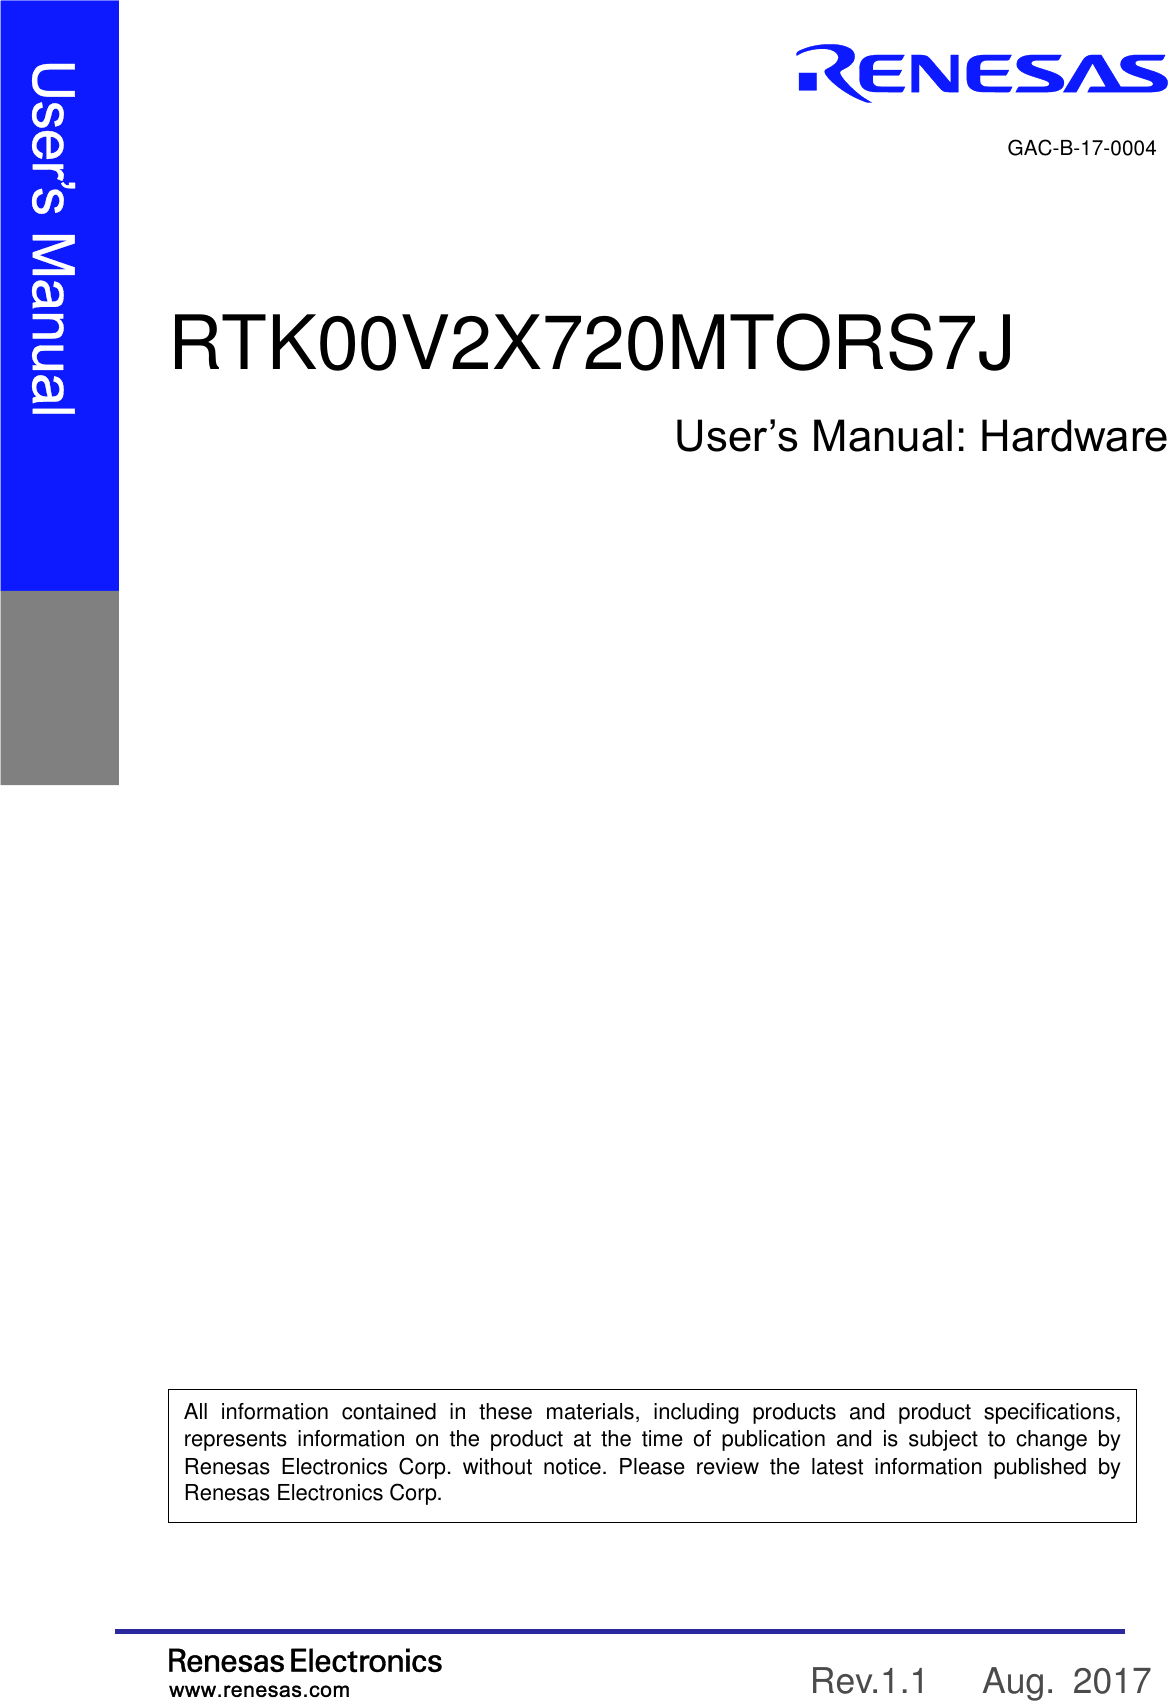                             All  information  contained  in  these  materials,  including  products  and  product  specifications, represents  information on  the  product  at  the  time  of  publication  and  is  subject  to  change  by Renesas  Electronics  Corp.  without  notice.  Please  review  the  latest  information  published  by Renesas Electronics Corp.                              RTK00V2X720MTORS7J  User’s Manual: Hardware Rev.1.1    Aug.  2017  GAC-B-17-0004 